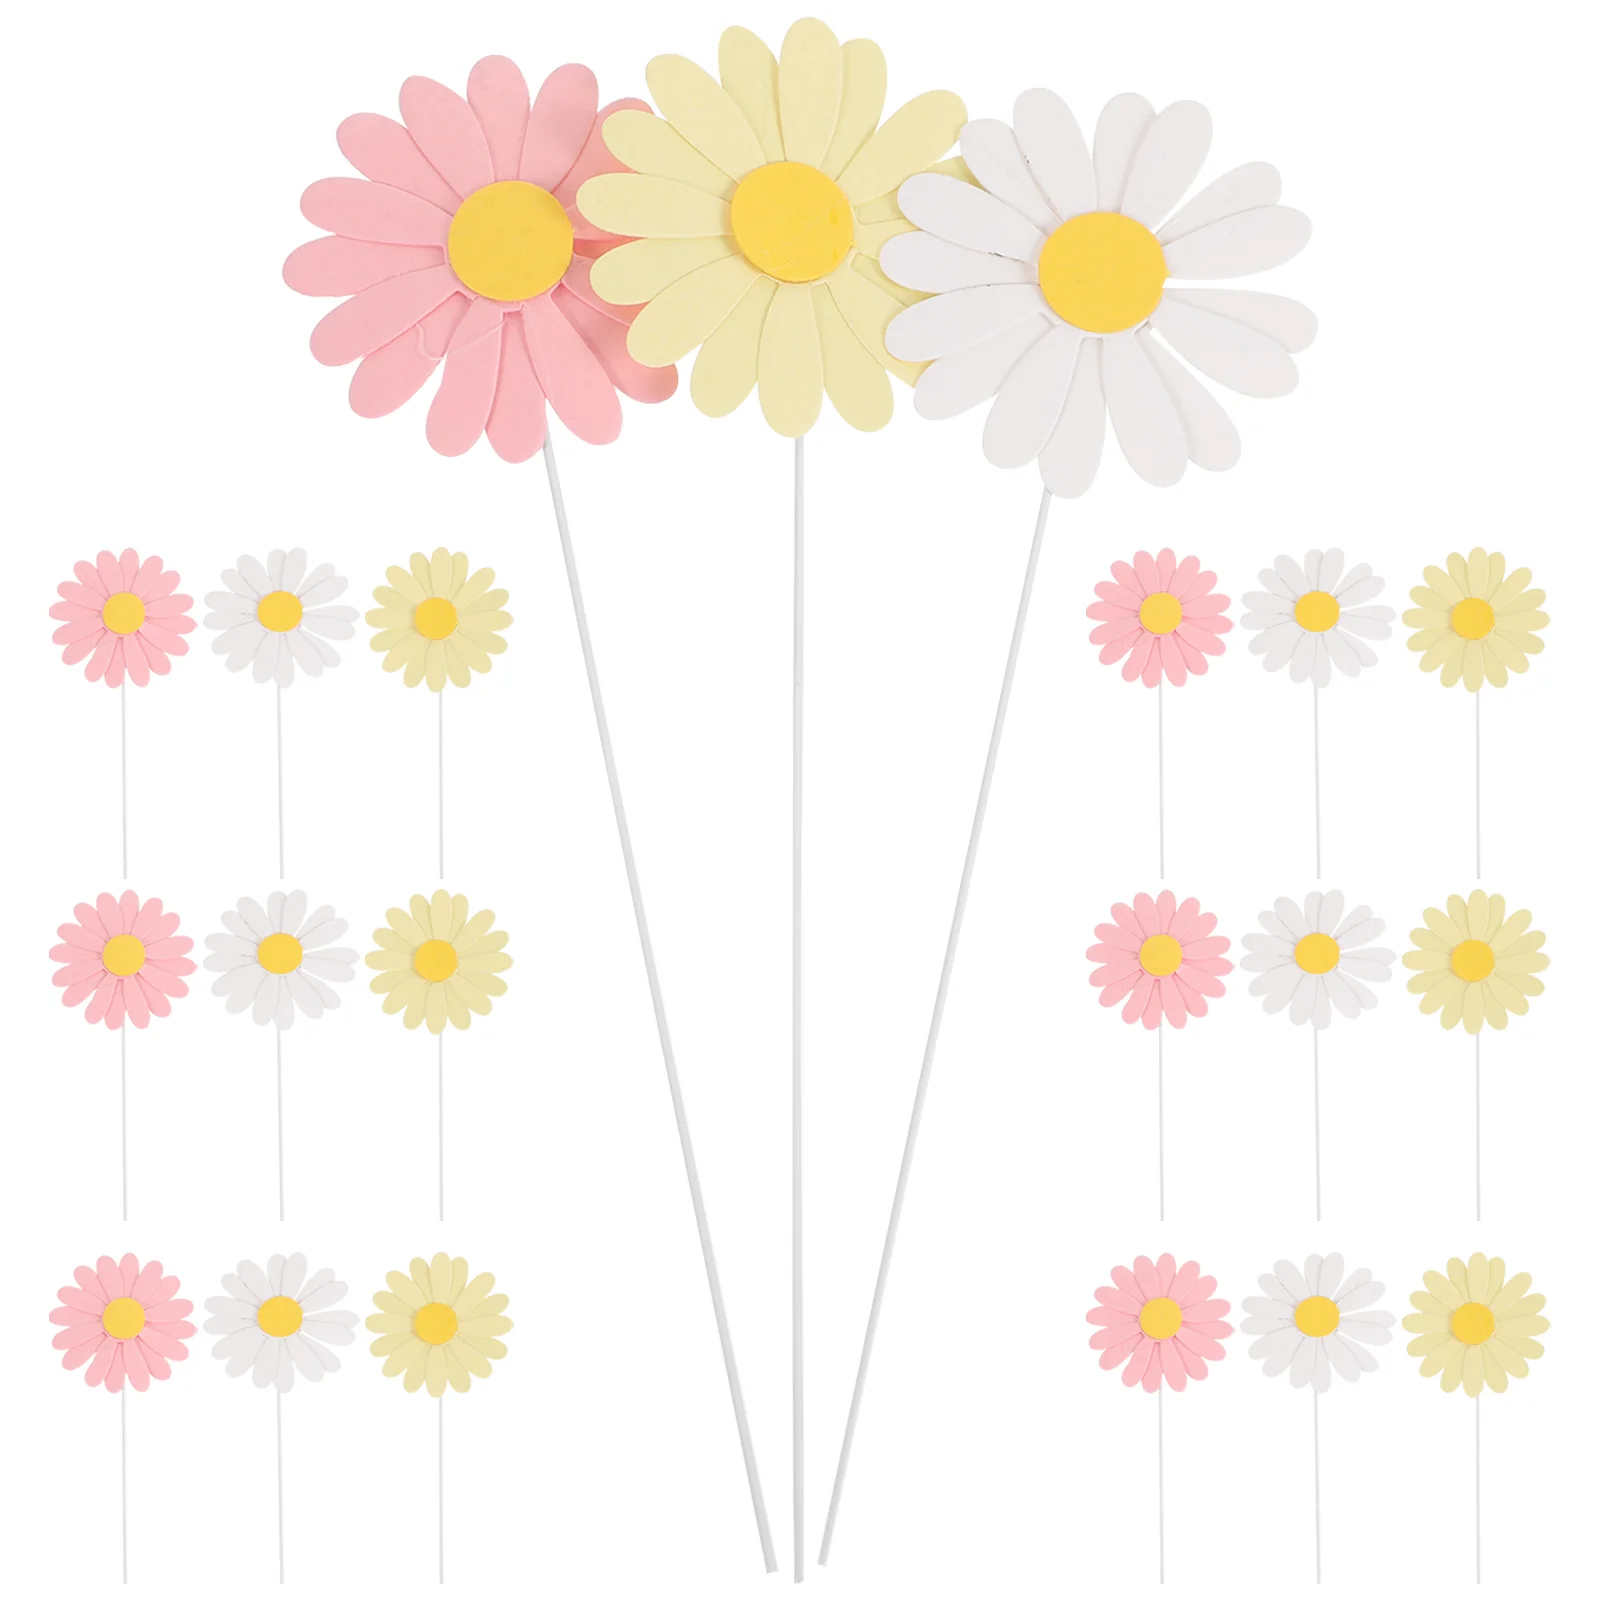 

30 Pcs Wedding Ceremony Decorations Daisy Cake Toppers Cupcake Floral Flower Picks Party Baby